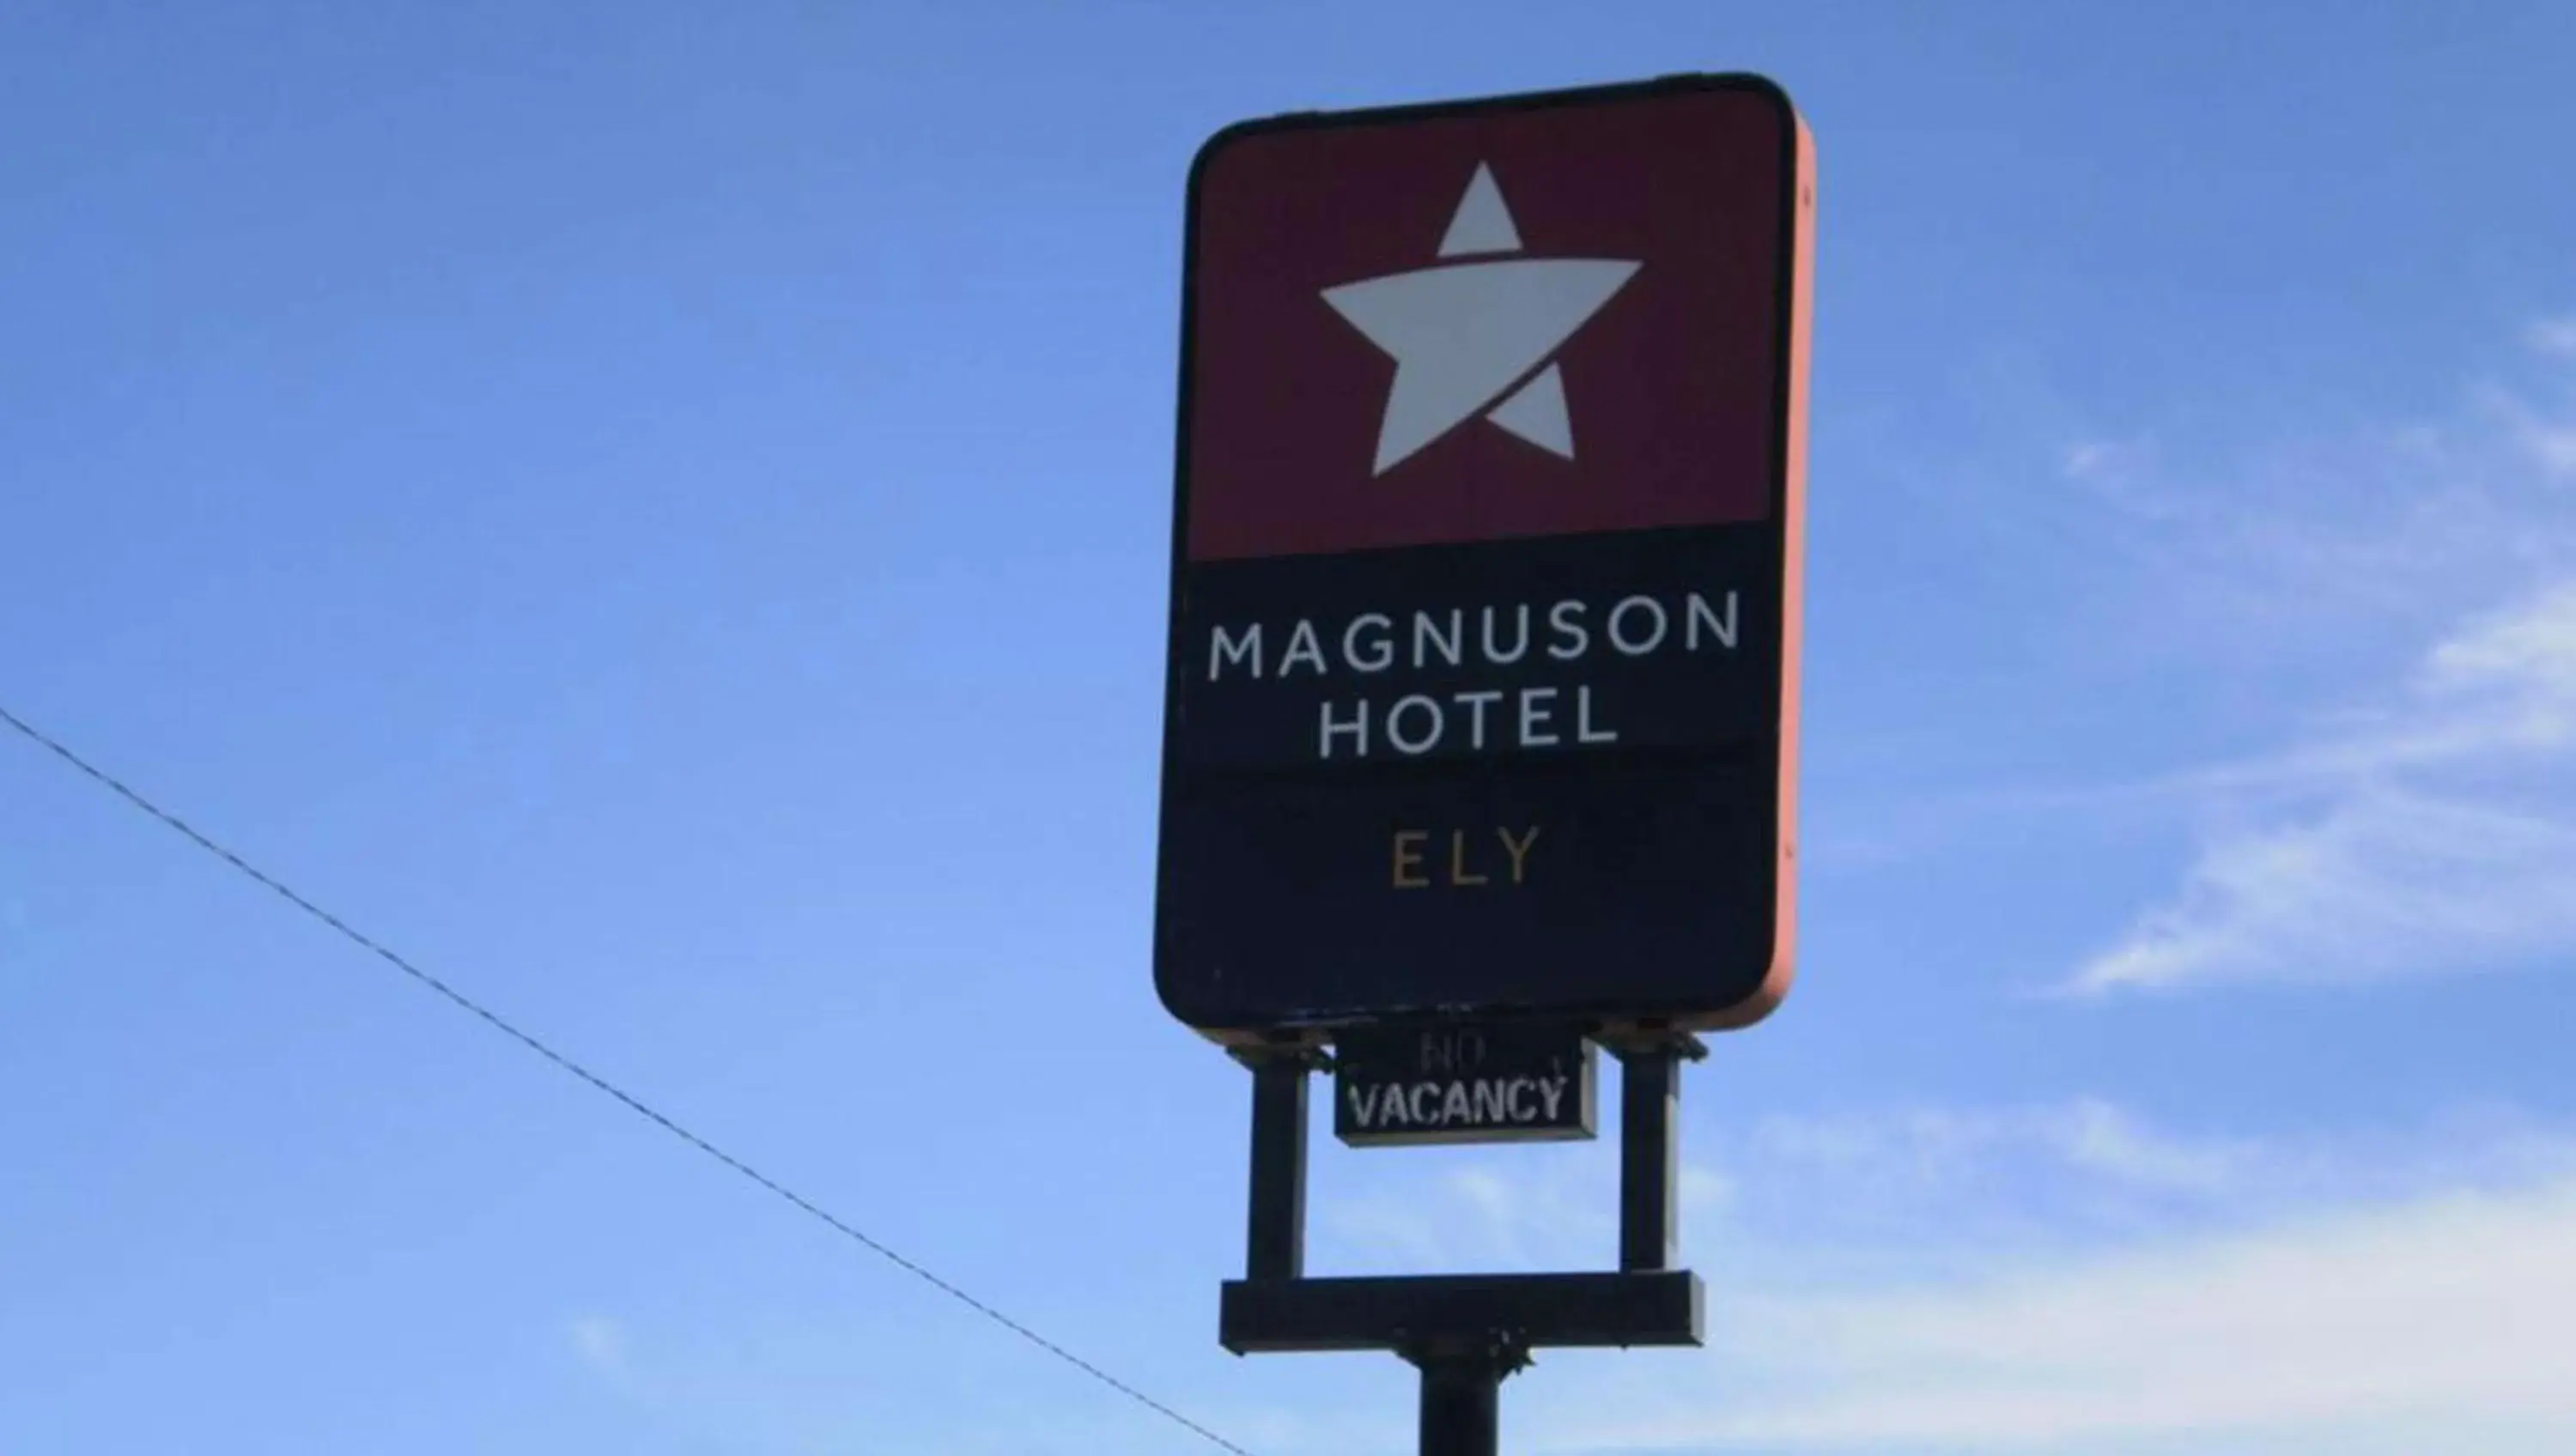 Property building in Magnuson Hotel Ely